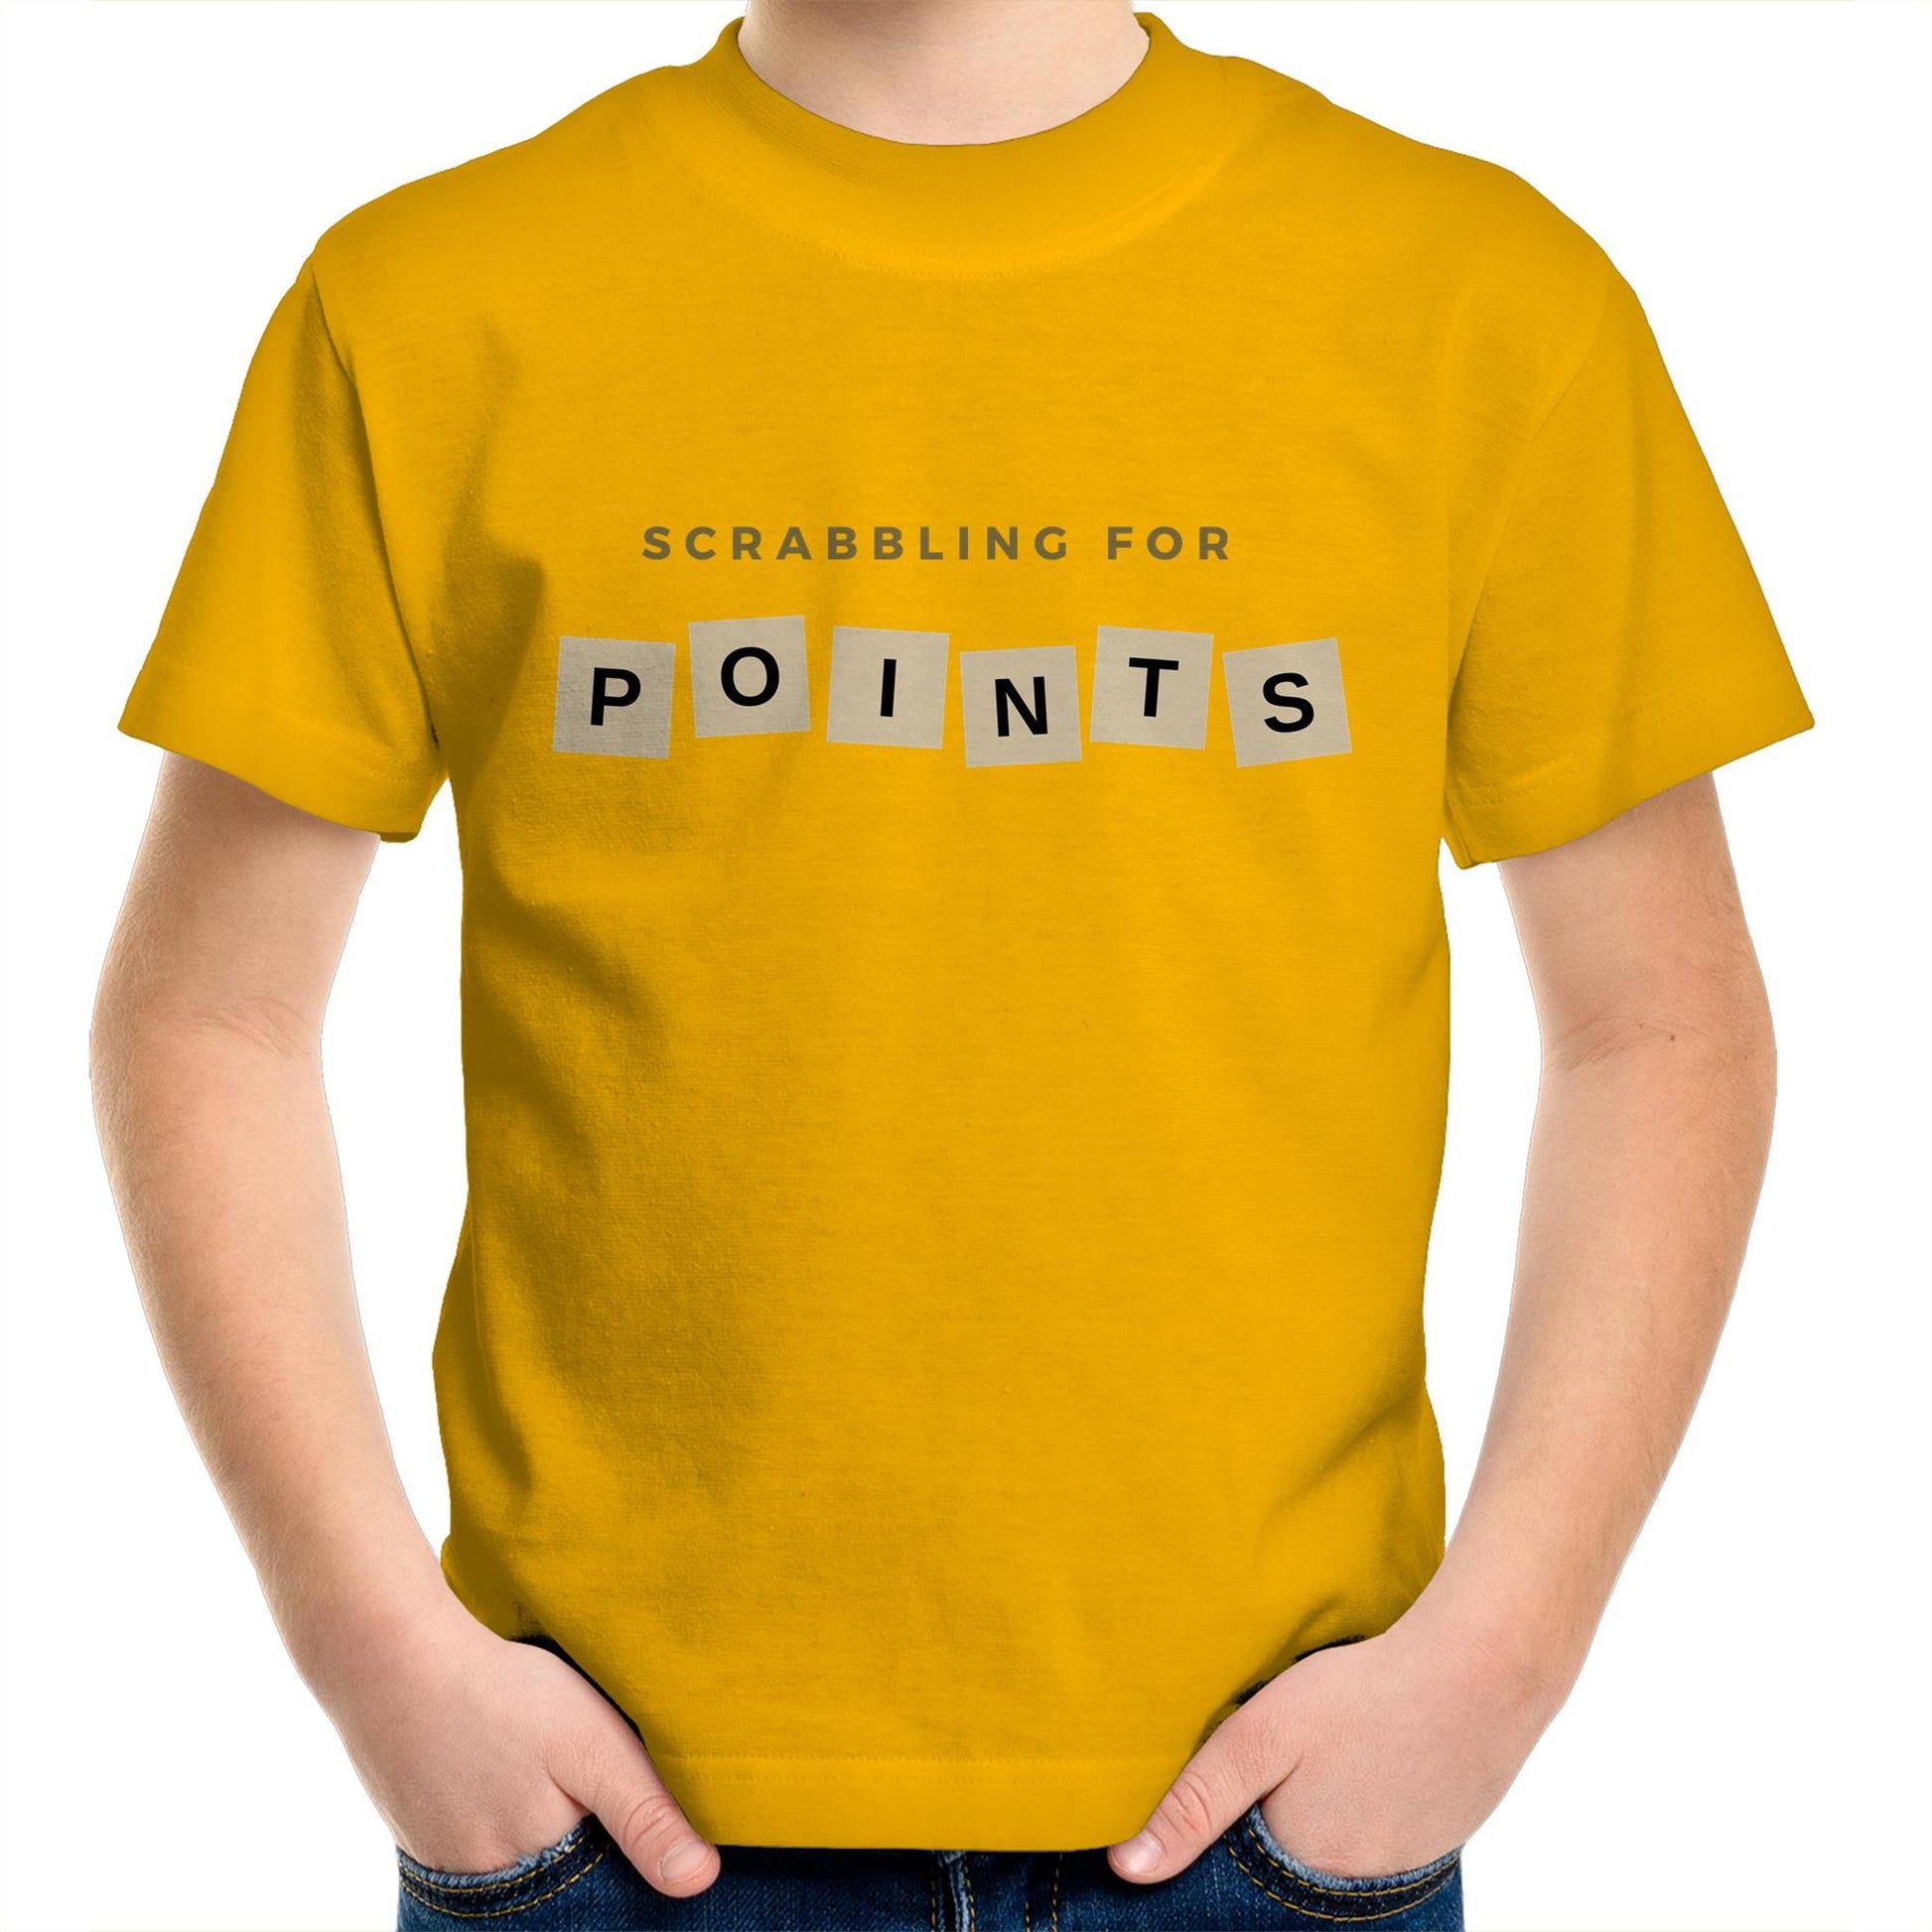 Scrabbling For Points - Kids Youth Crew T-Shirt Gold Kids Youth T-shirt Games